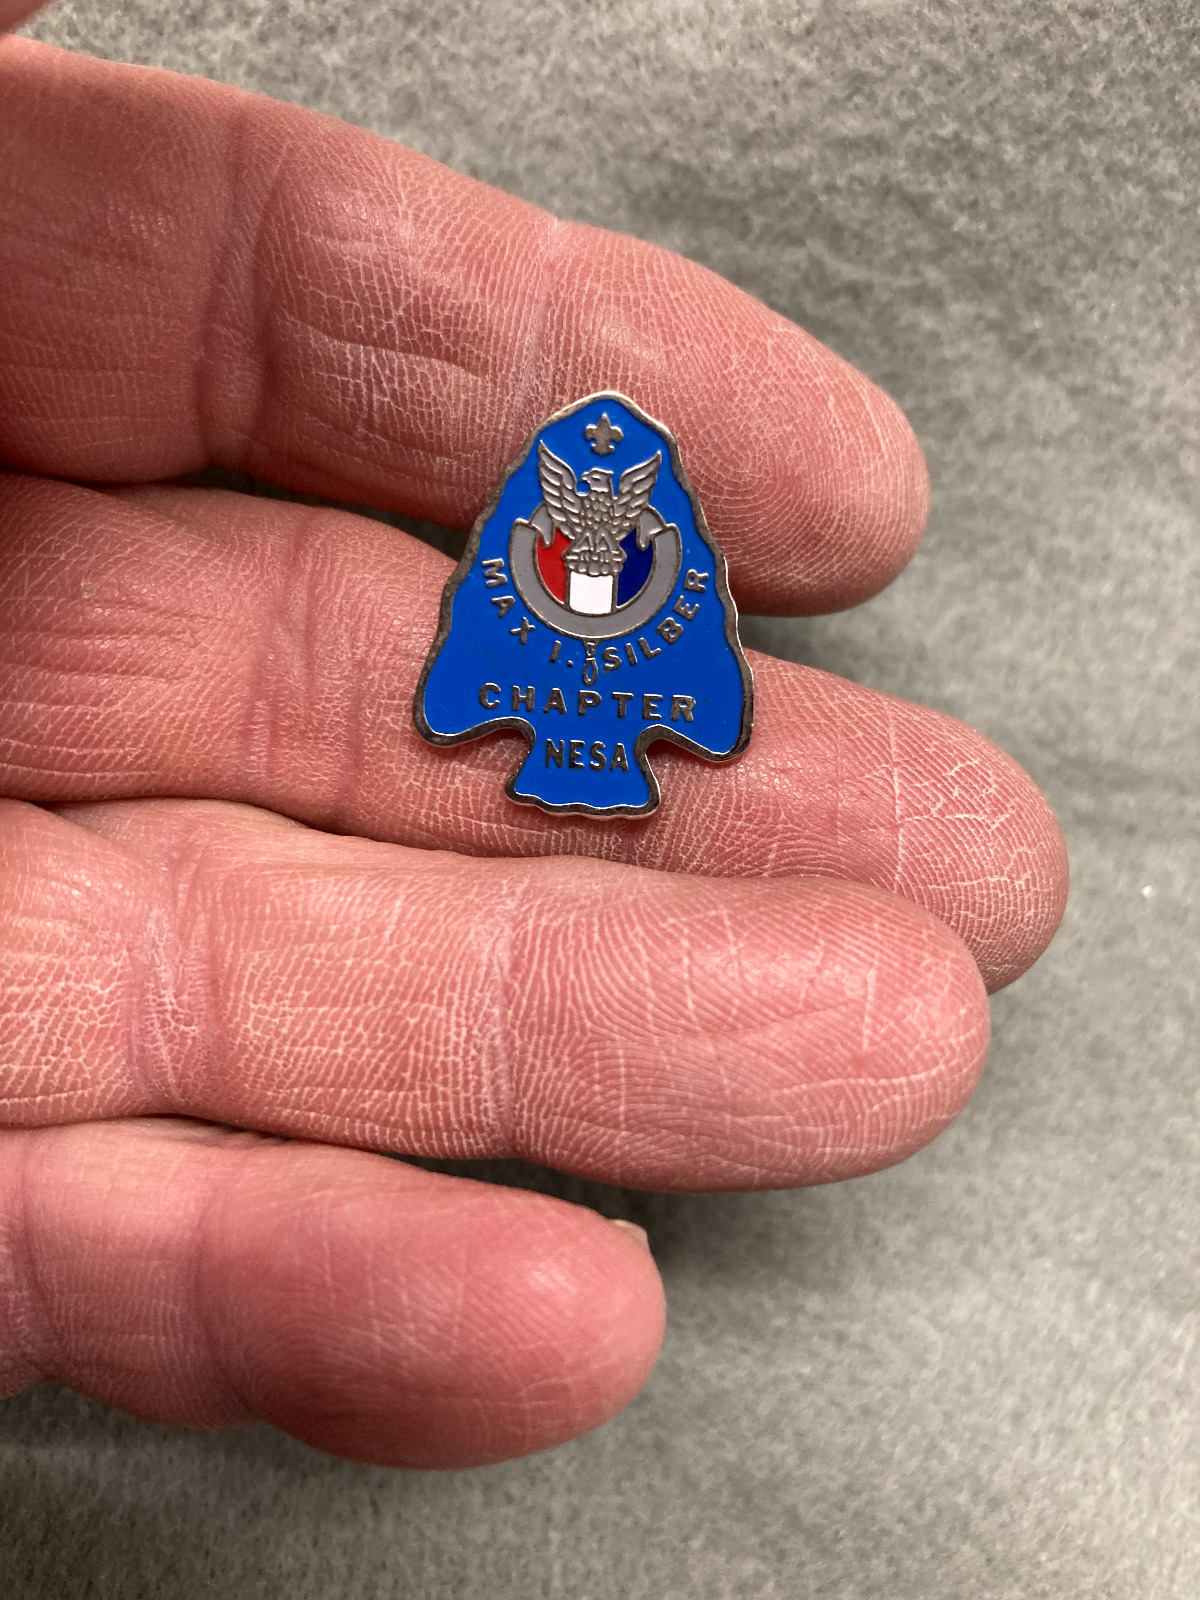 (123)   Boy Scouts /  Max Silber Chapter - National Eagle Scout Association pin